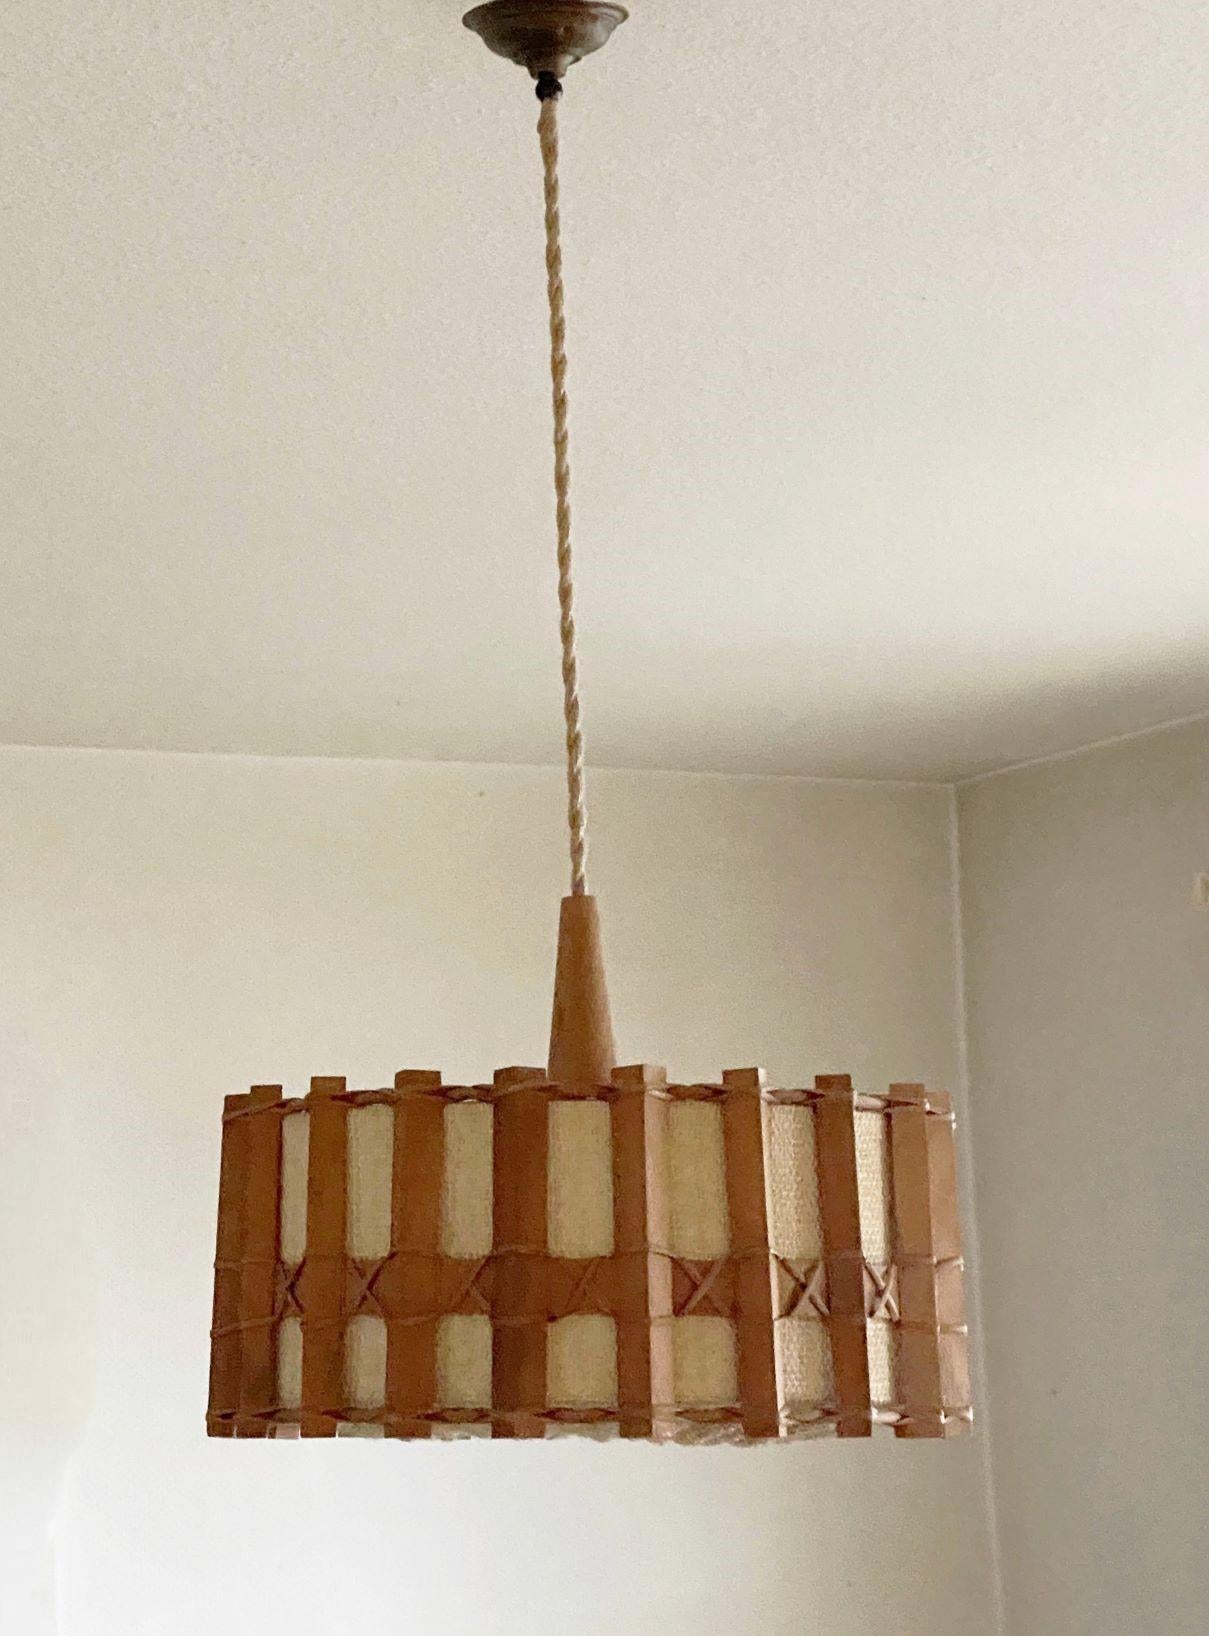 Rare 1960s Scandinavian wooden and woven rattan pendant lamp with textile shade and a single Edison light socket for a large sized screw bulb.
Measures: Diameter 16.50